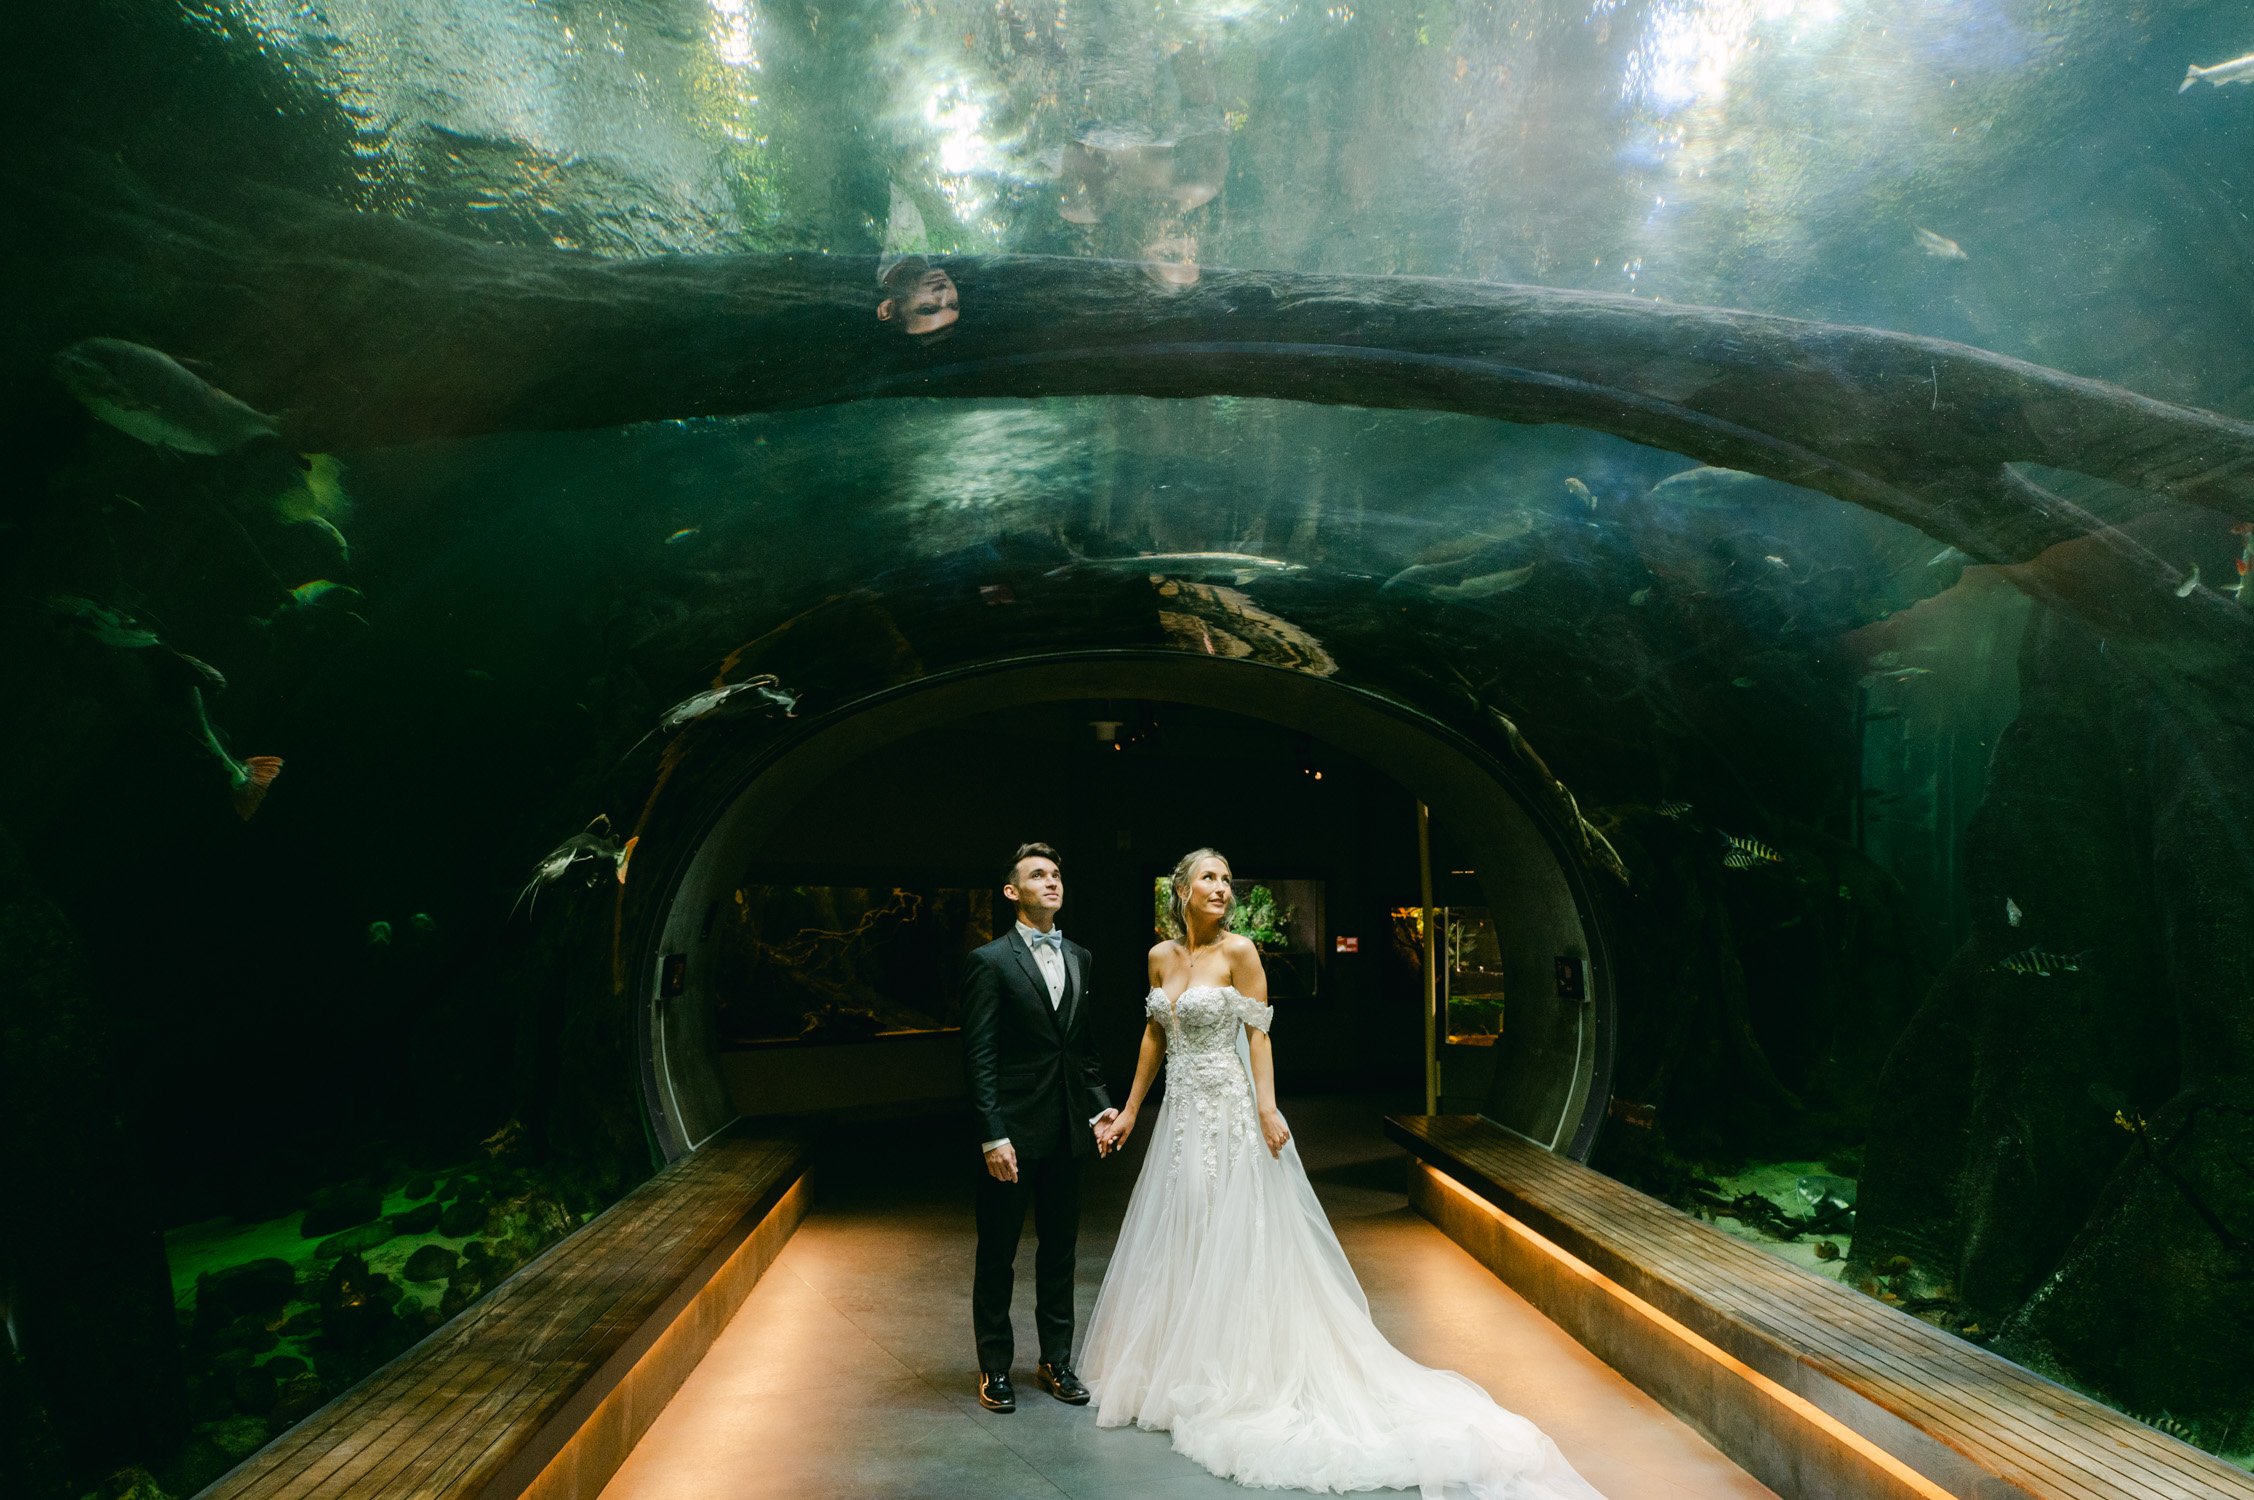 California academy of Sciences in San Francisco Wedding, photo of the couple in a big aquarium looking at the fishes